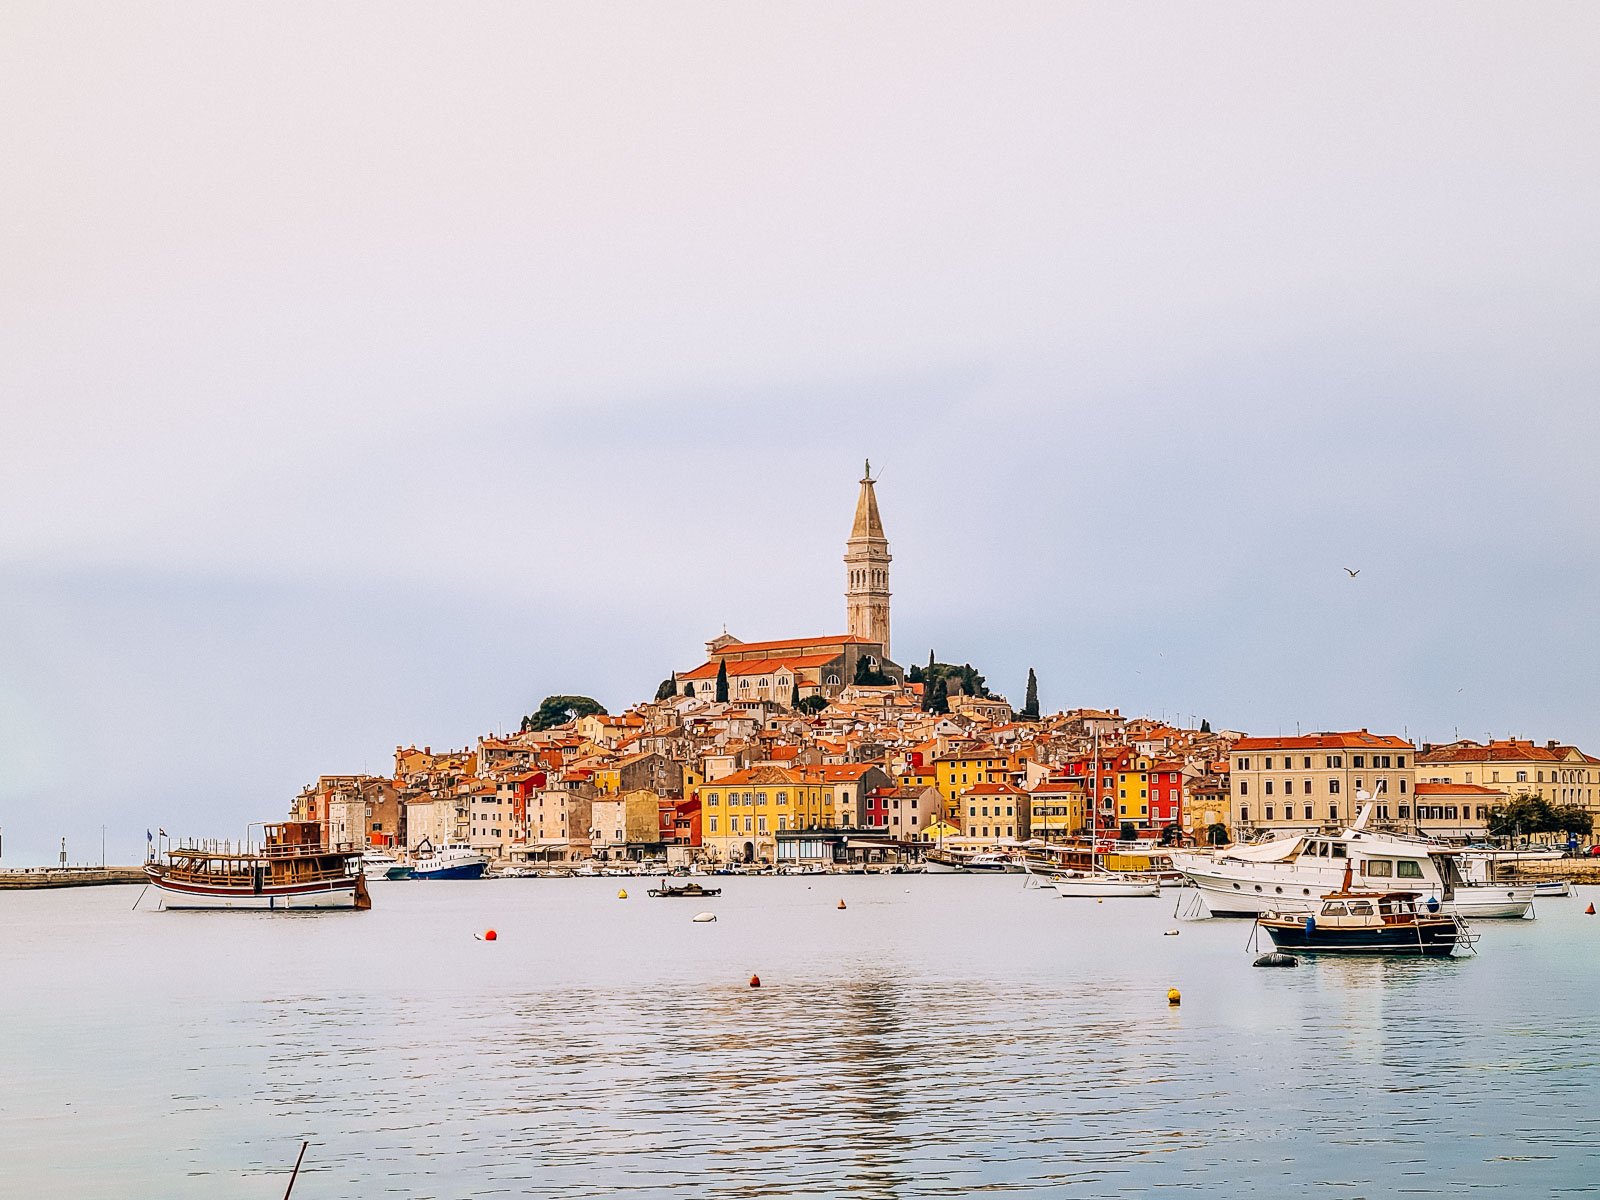 Looking across water at a Rovinj town with colourful buildings clustered around a bell tower at the top of the hill